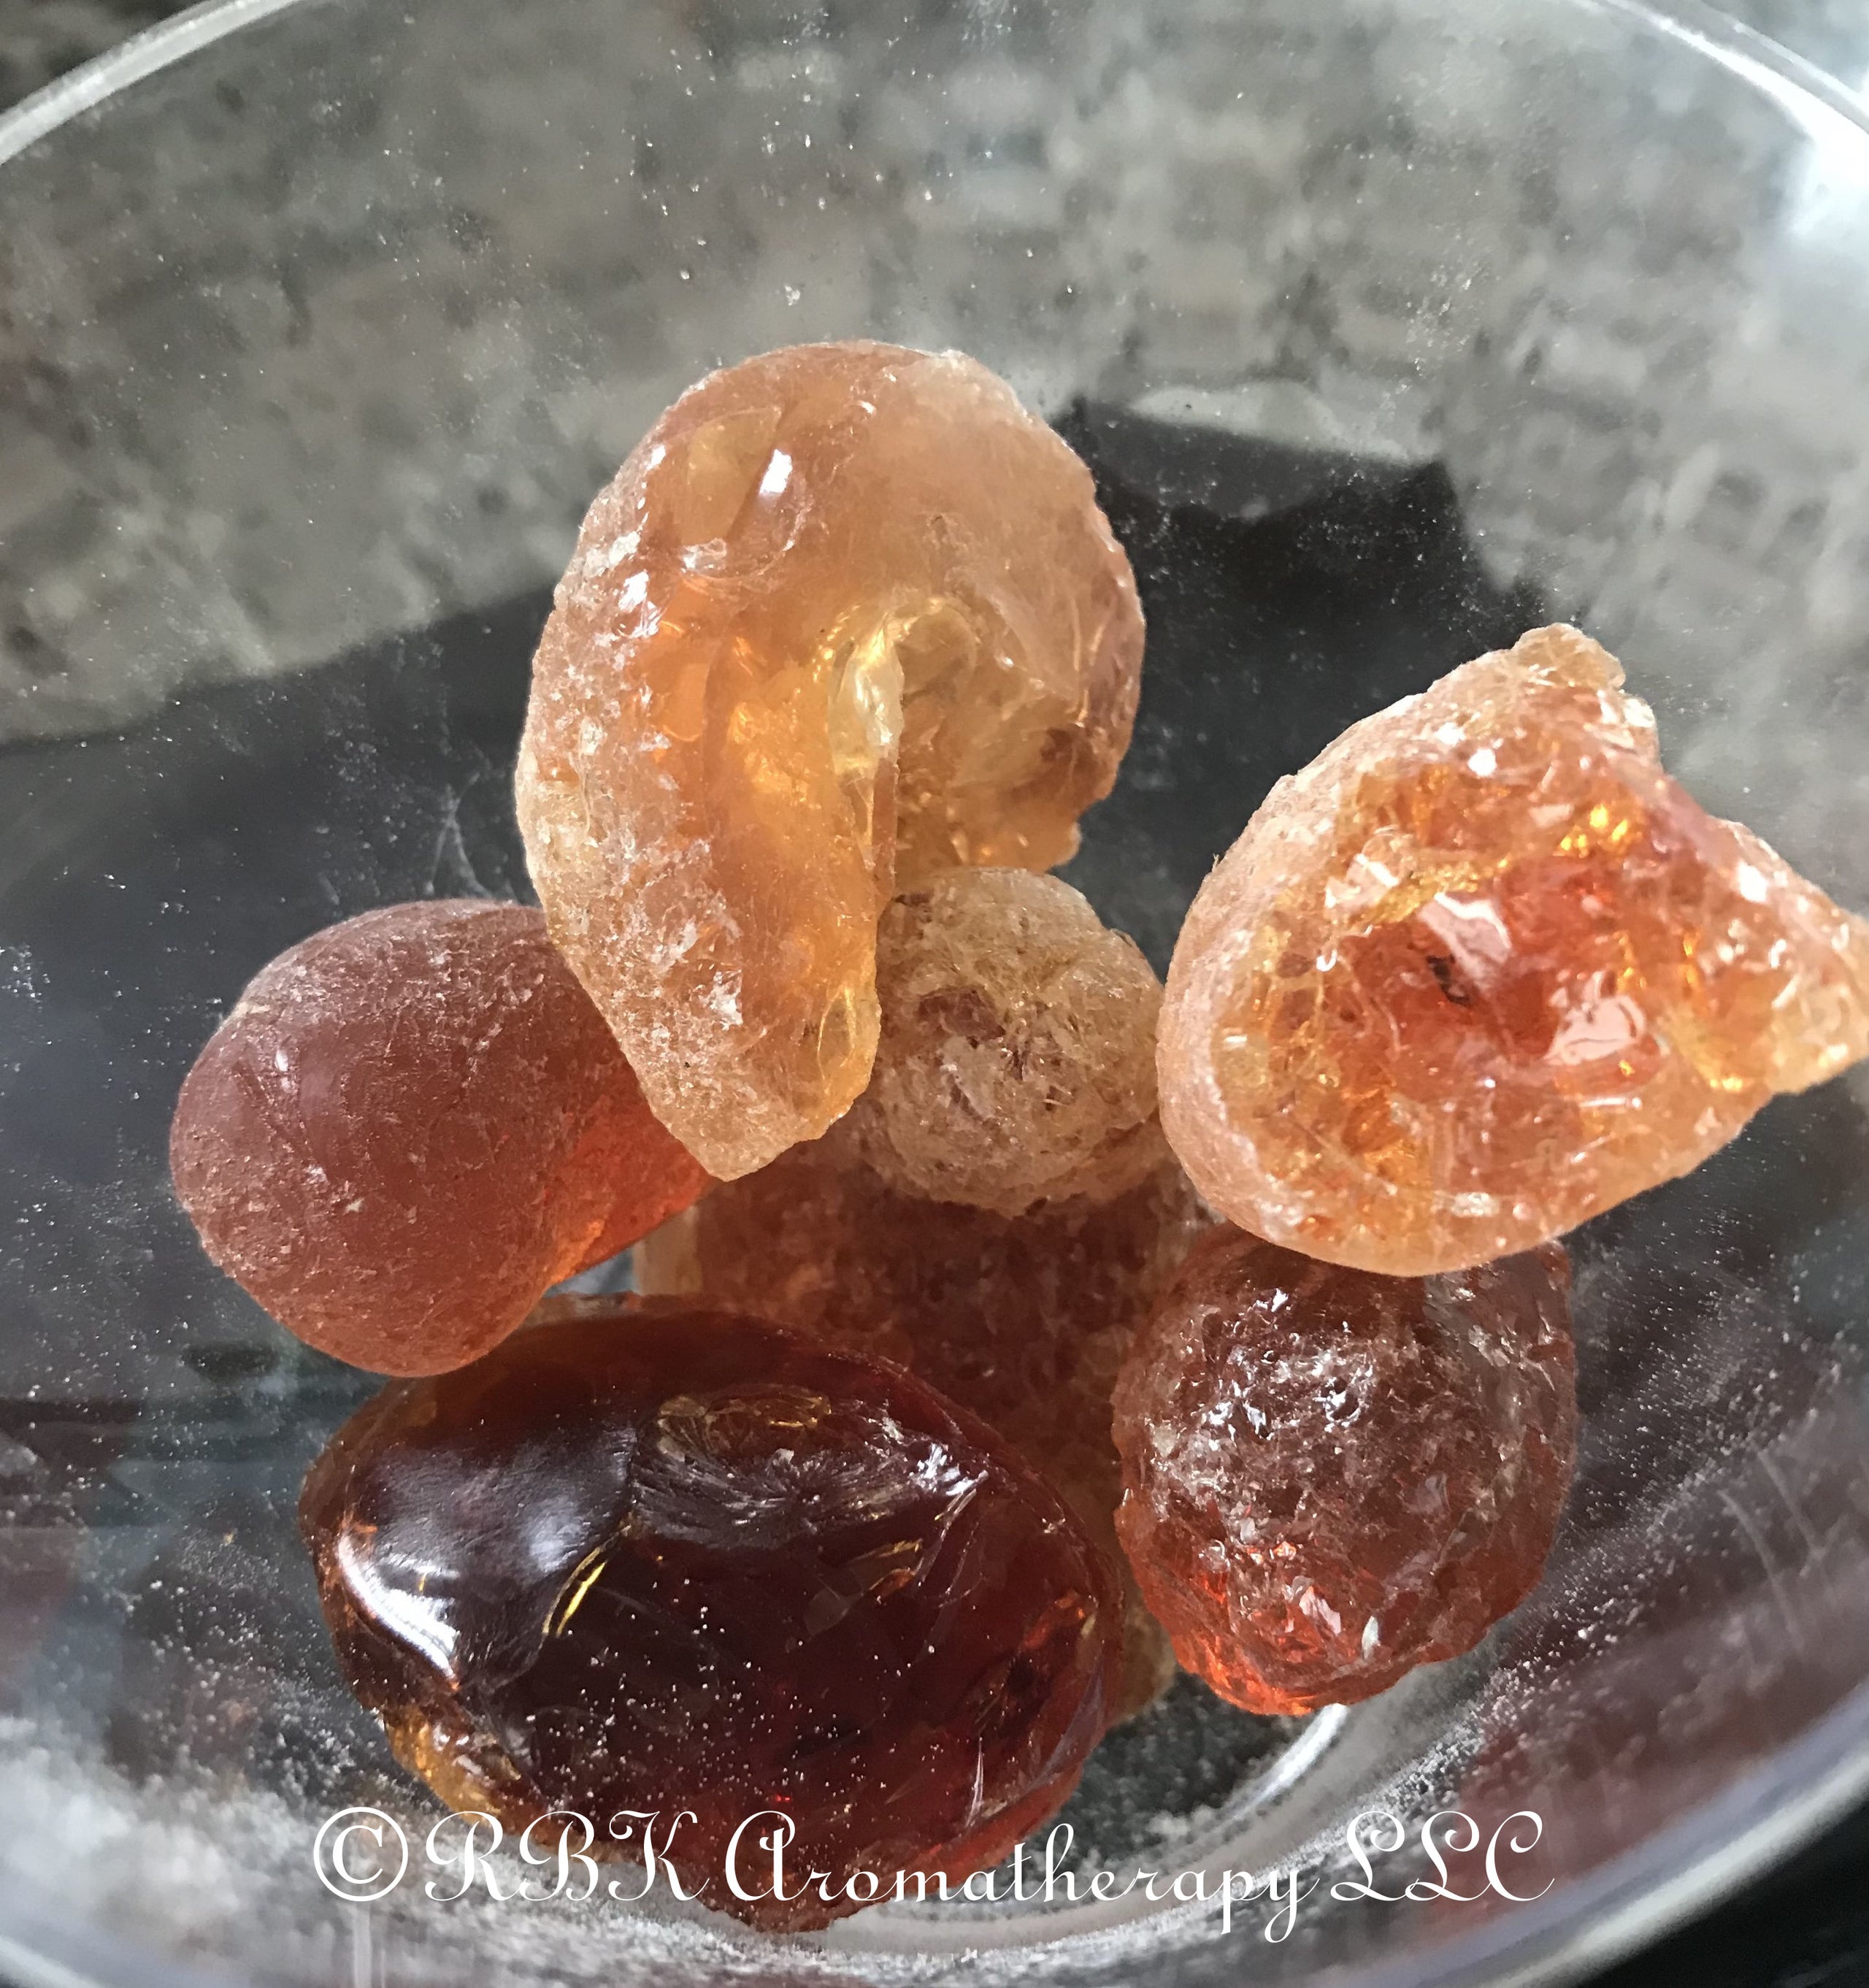 gum arabic known as acacia gum was collected from Acacia nilotica